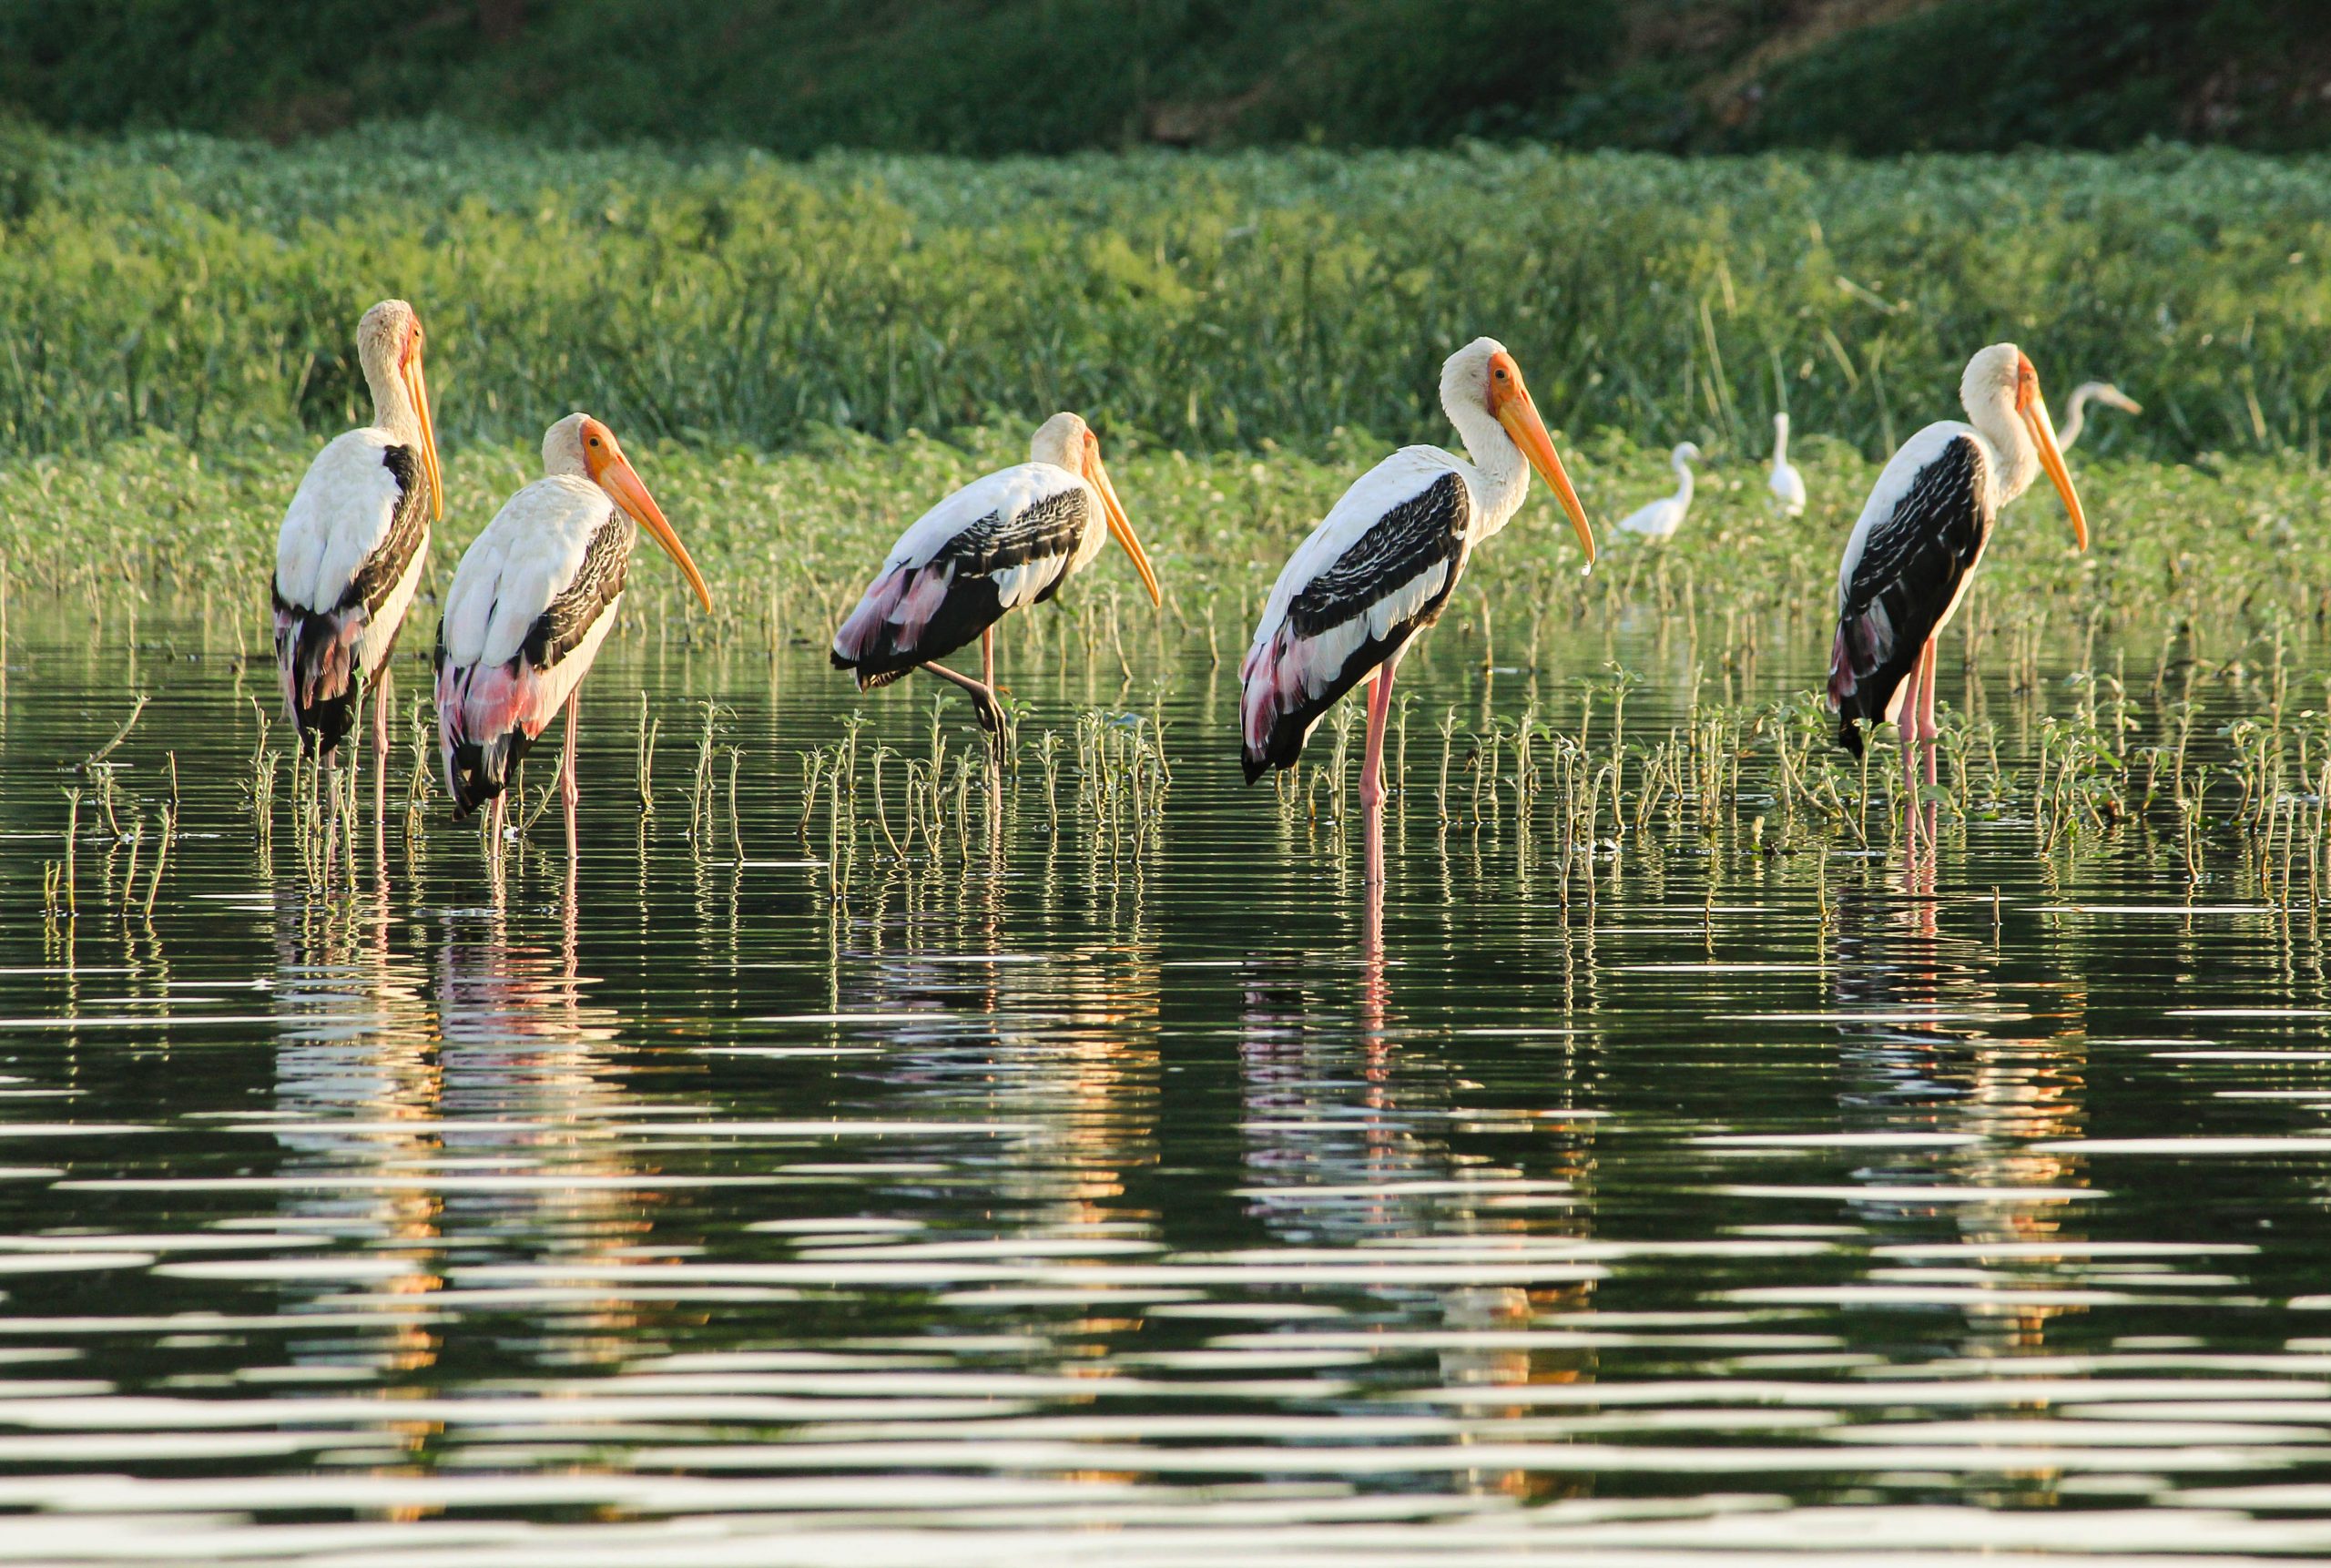 Painted storks